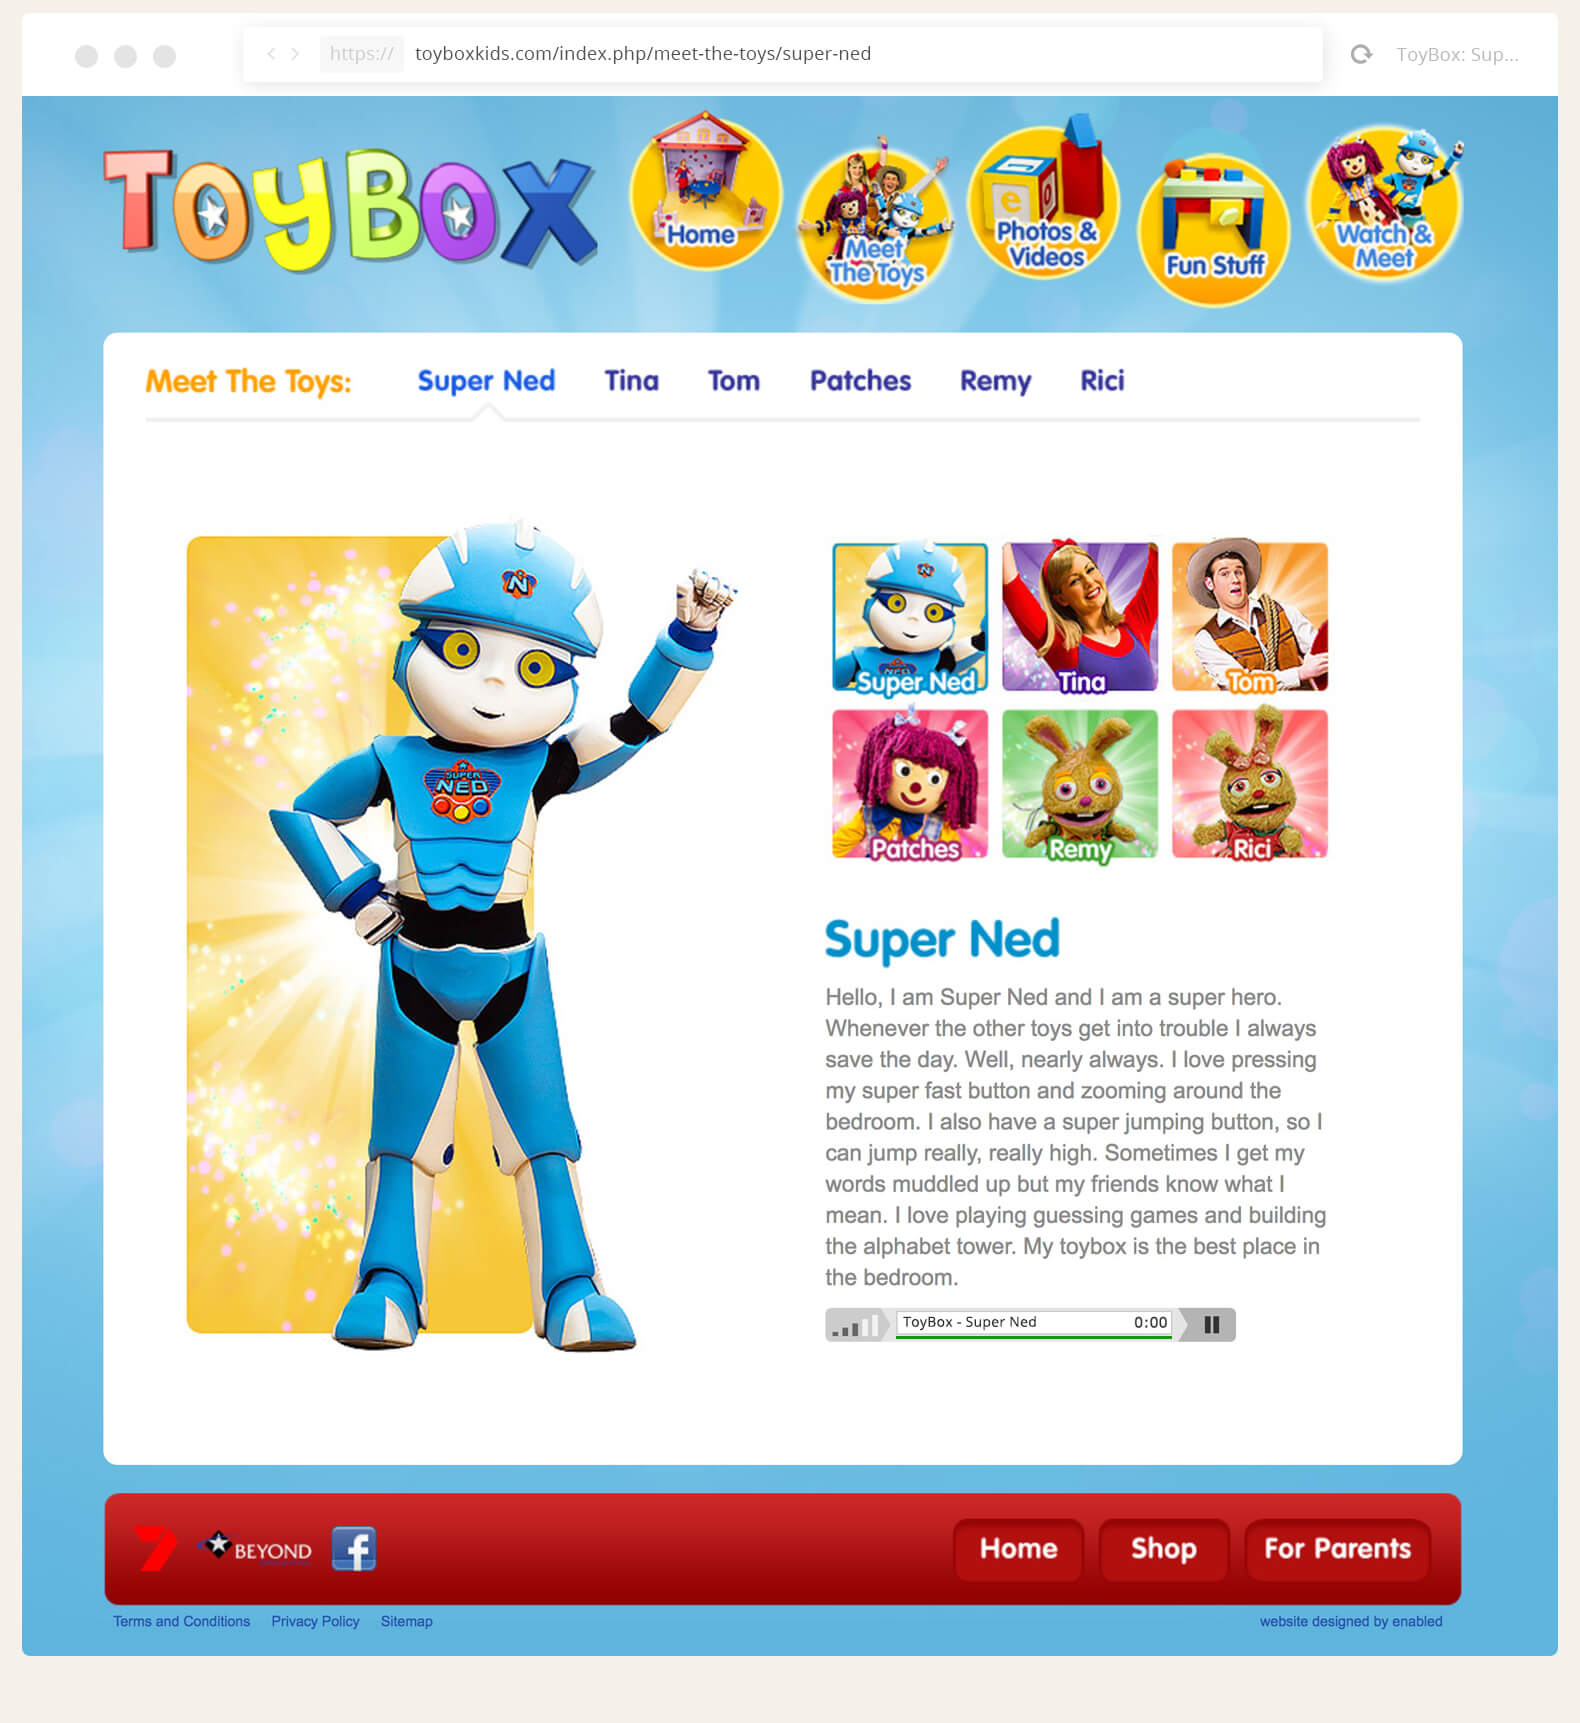 ToyBox - Meet the toys: Super Ned